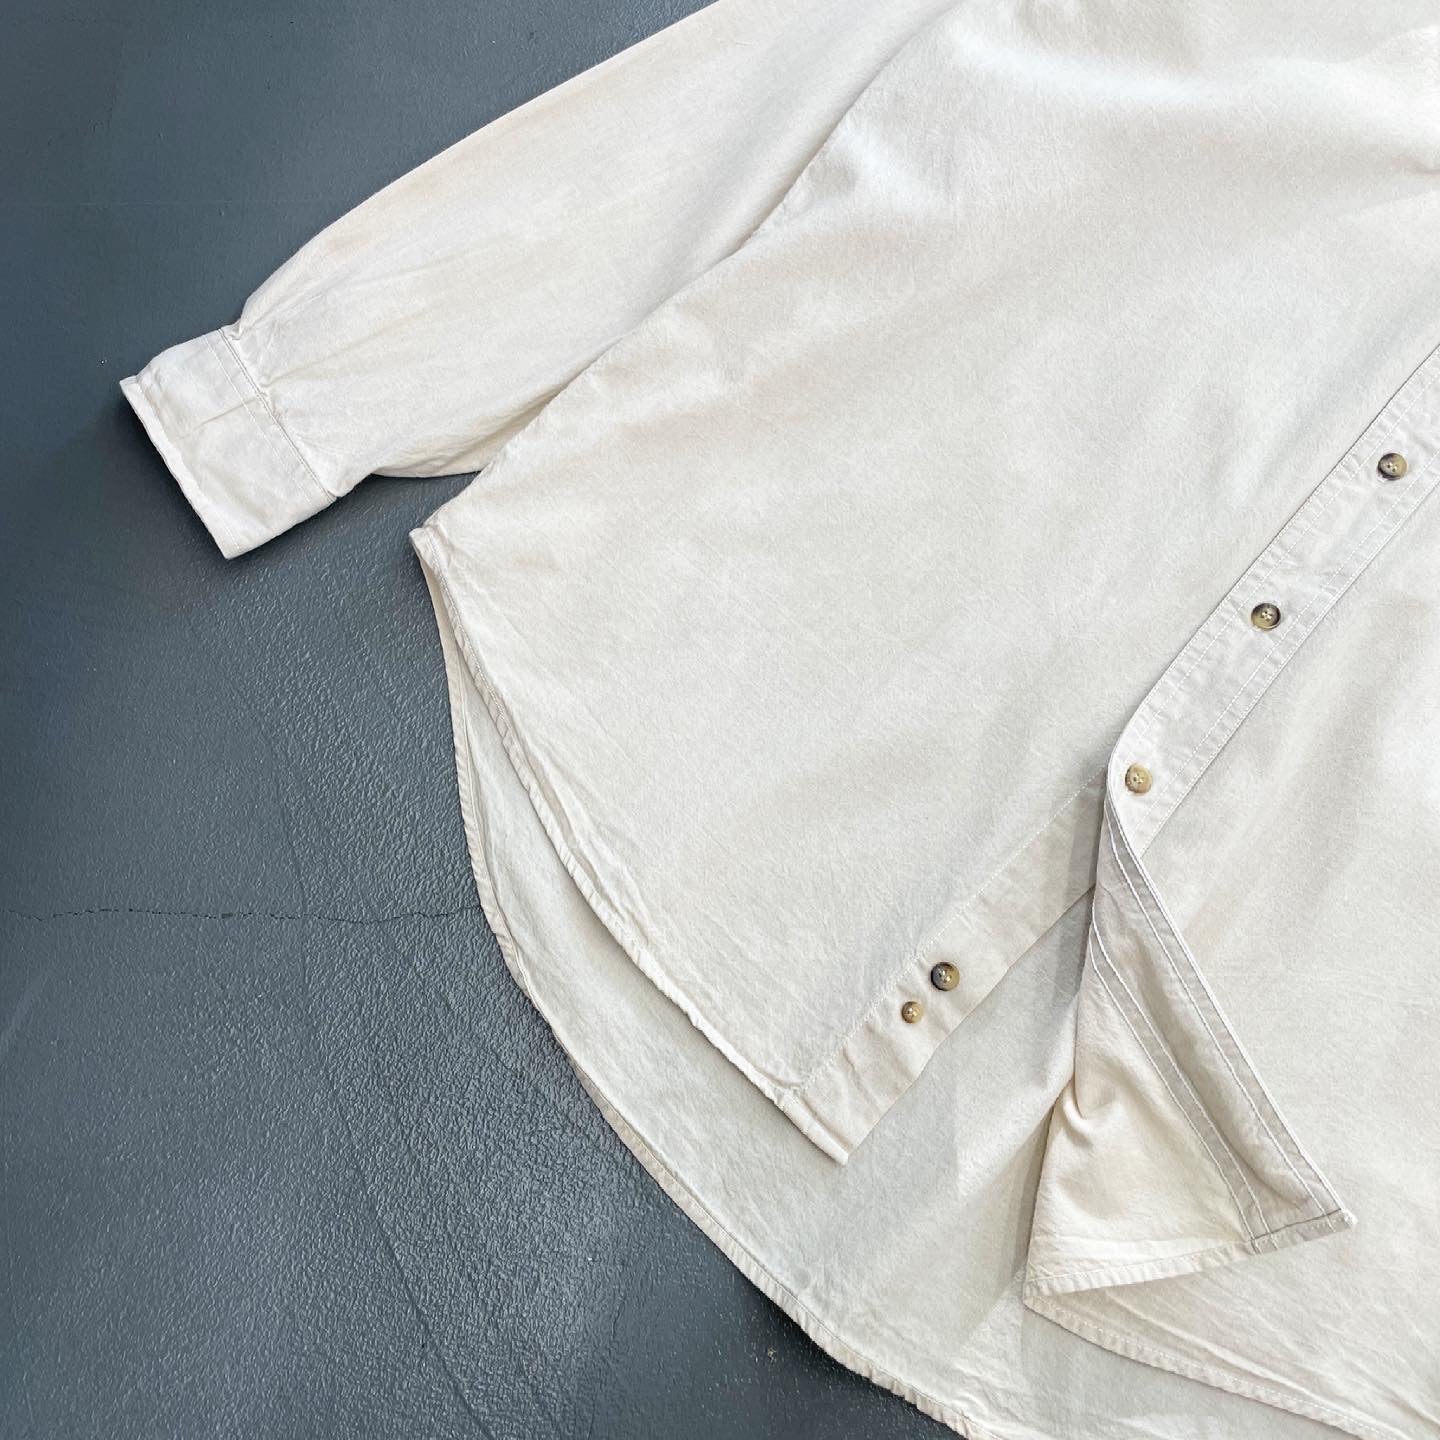 FIELD TRADITIONS by Lee Sport L/S Cotton Shirt